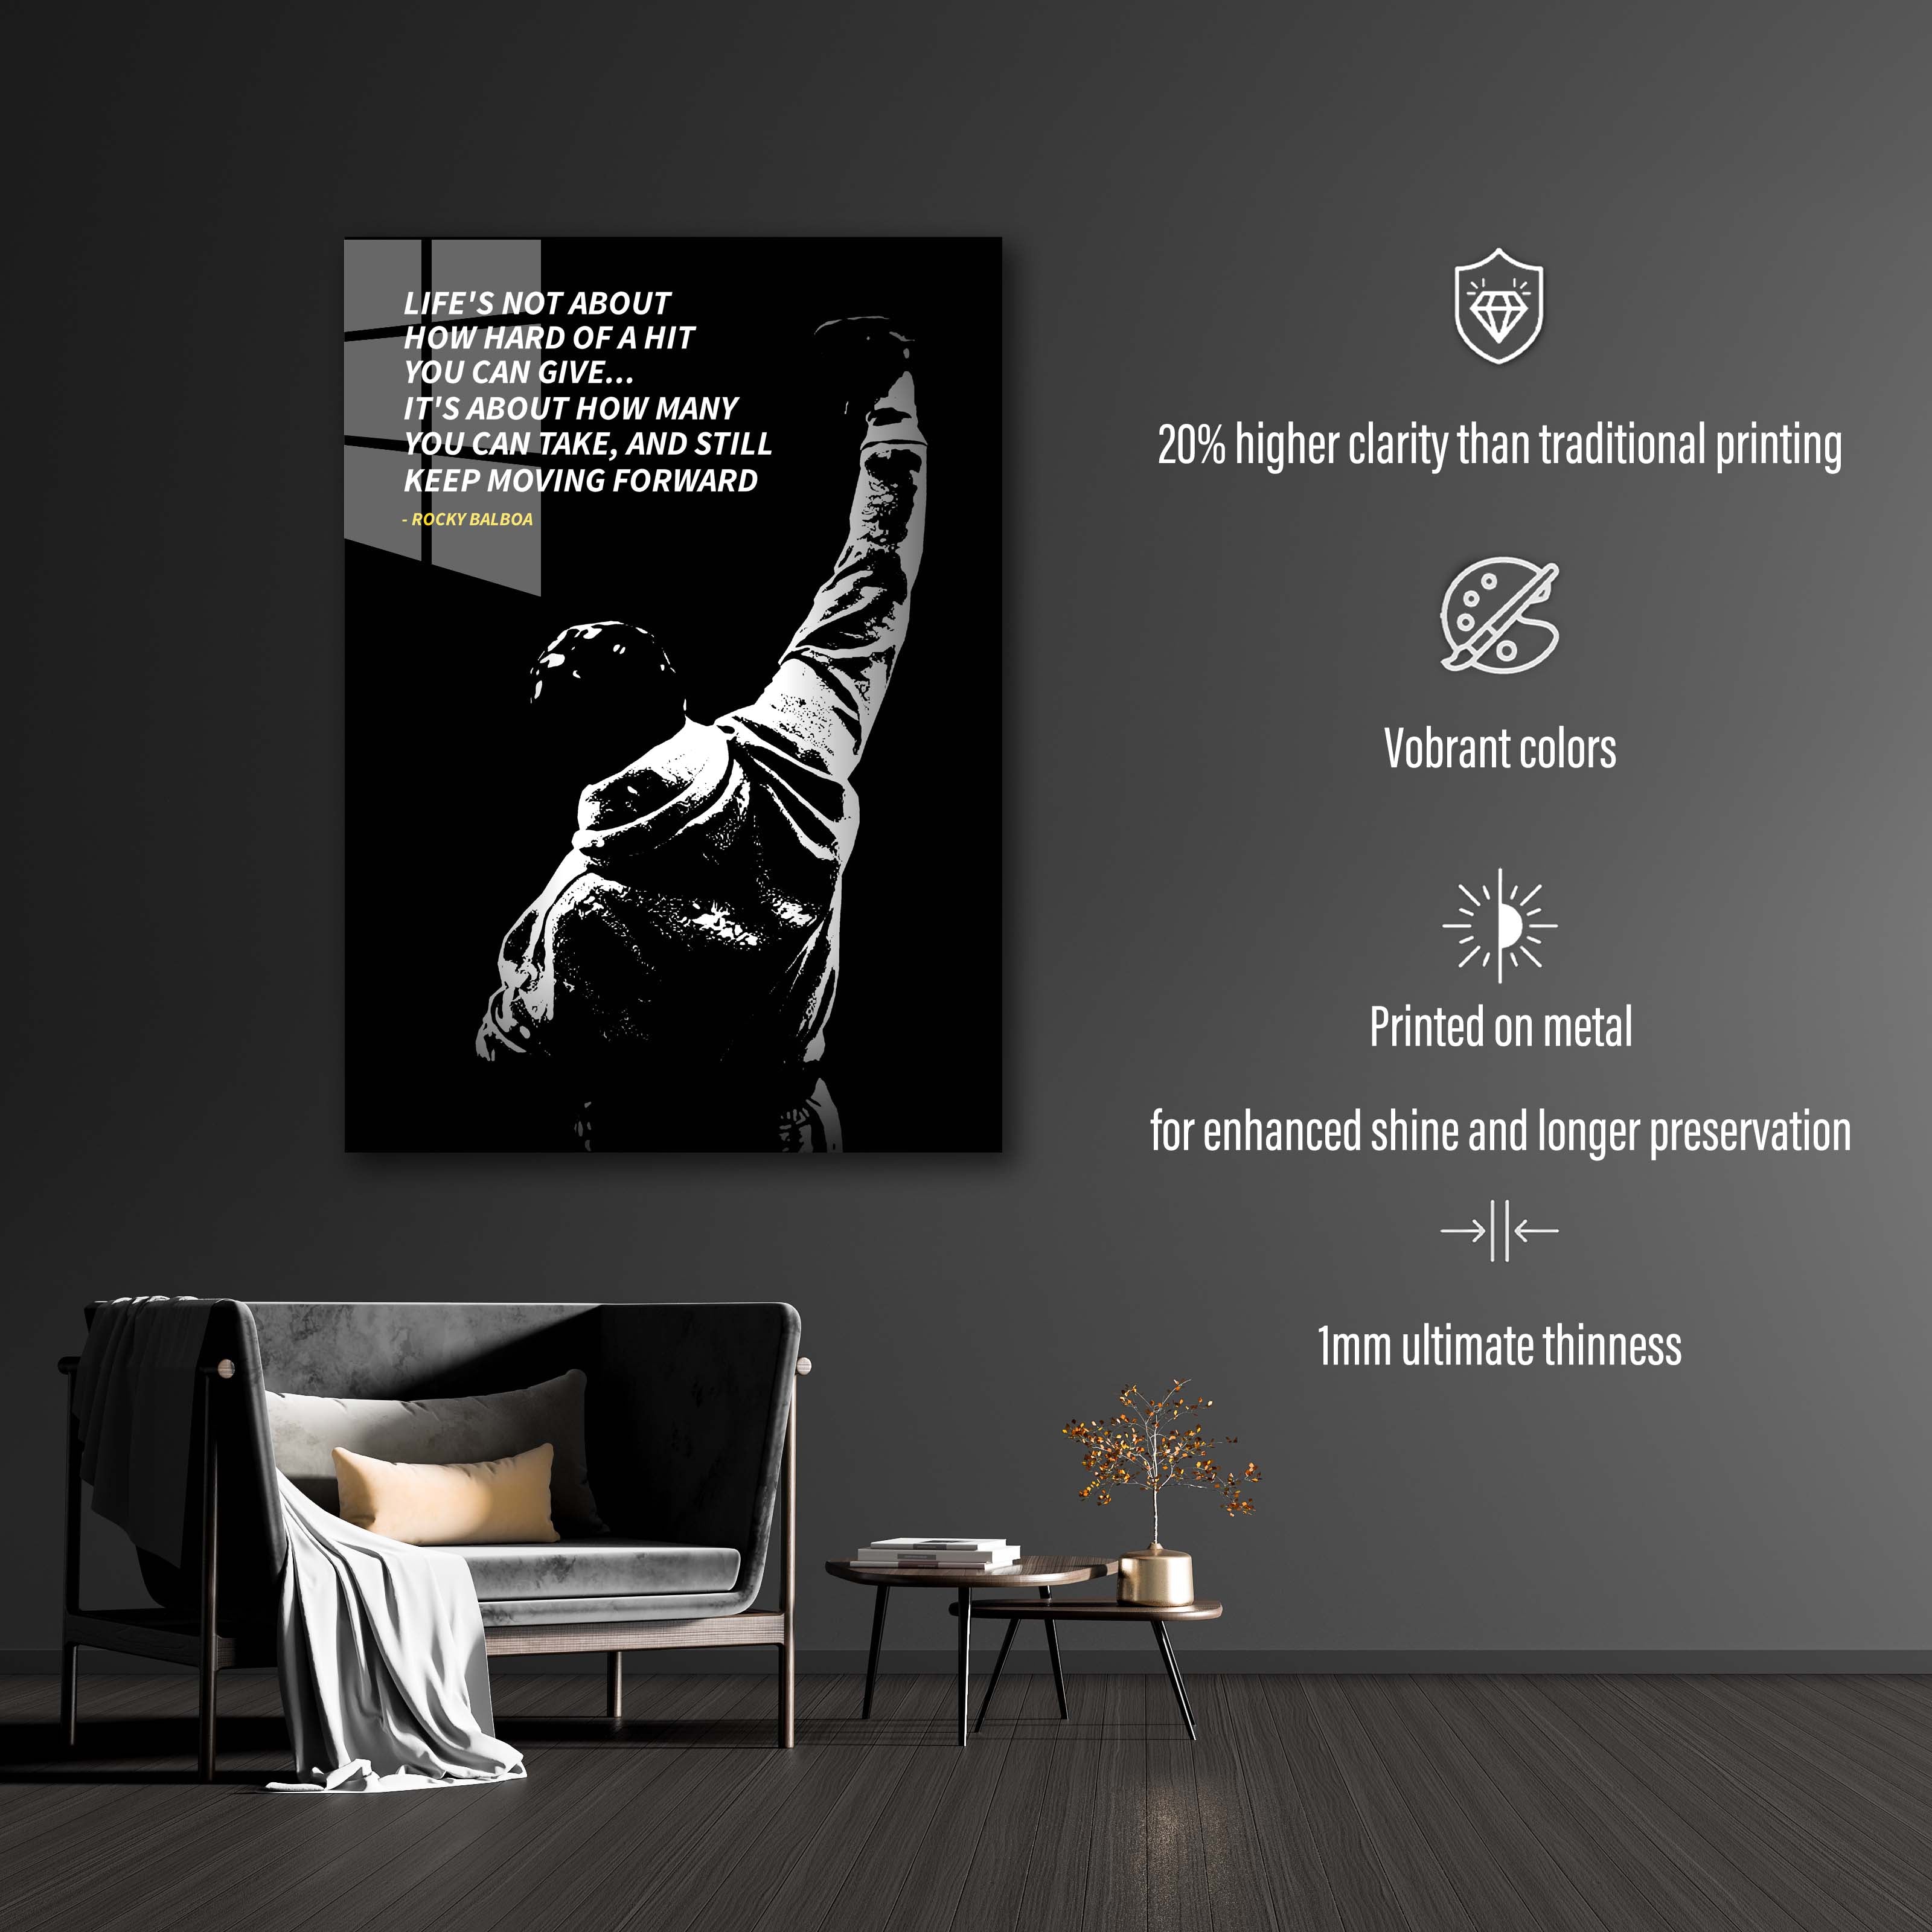 Rocky Balboa quotes  -designed by @Dayo Art